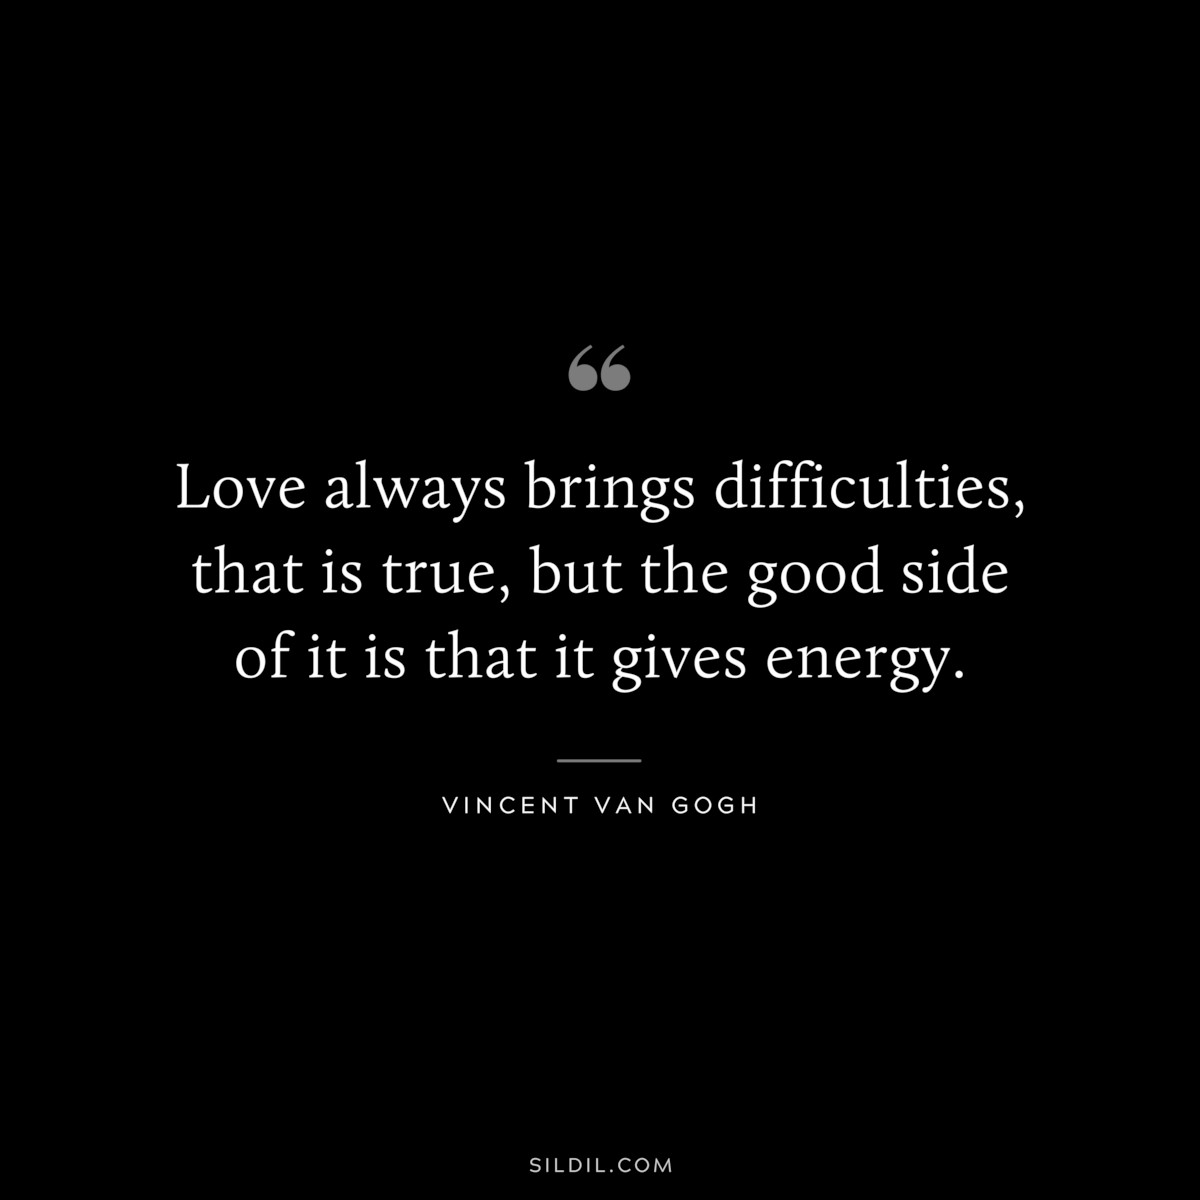 Love always brings difficulties, that is true, but the good side of it is that it gives energy. ― Vincent van Gogh